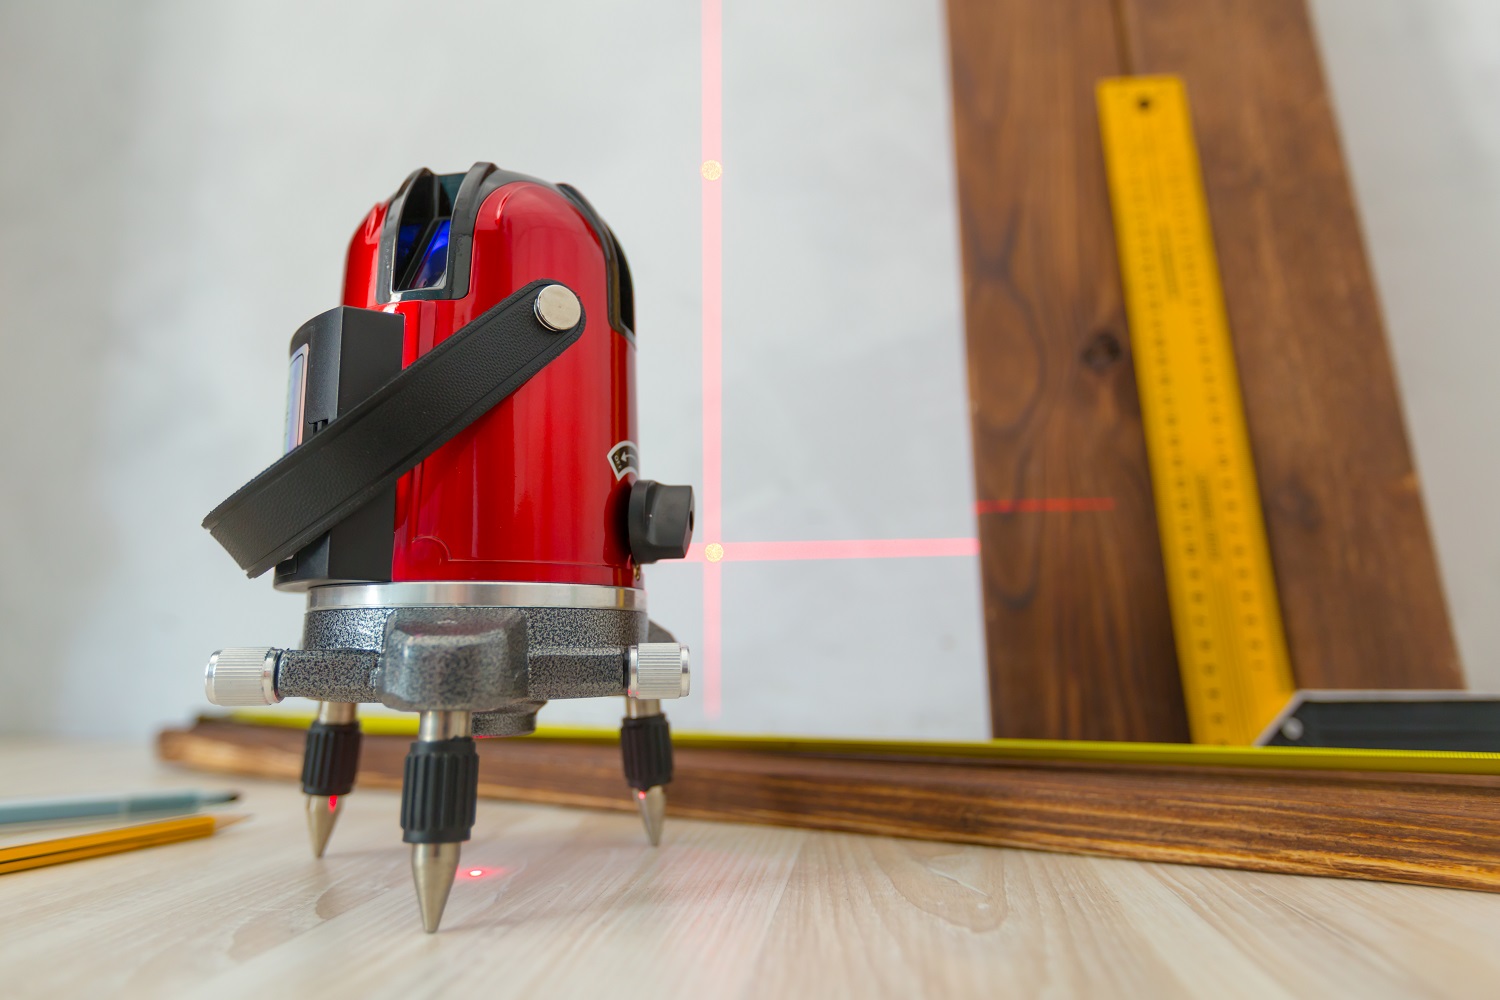 How To Use Cross Line Laser Level